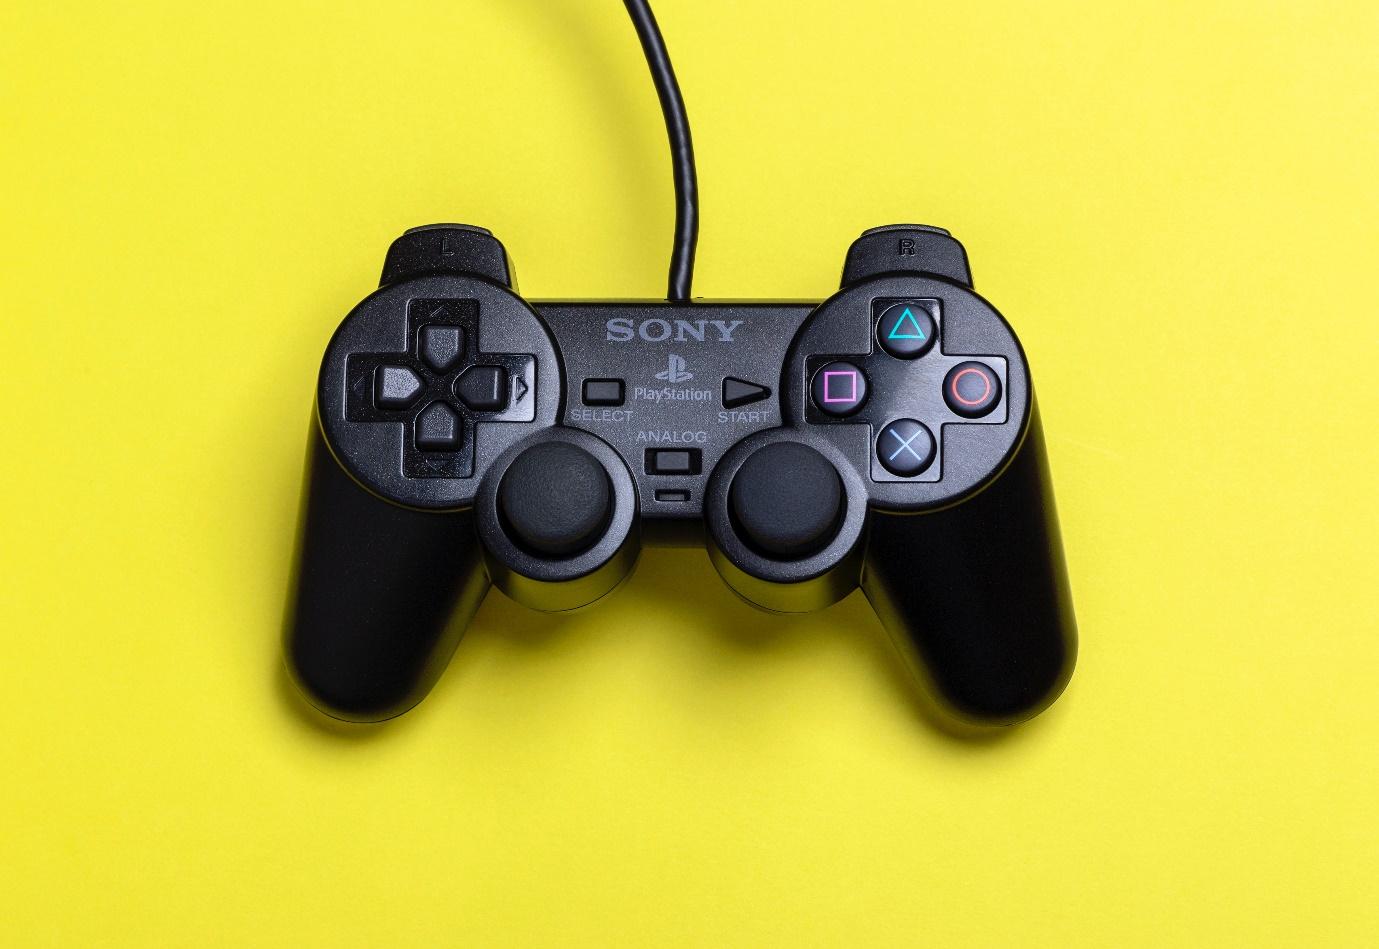 A black video game controller

Description automatically generated